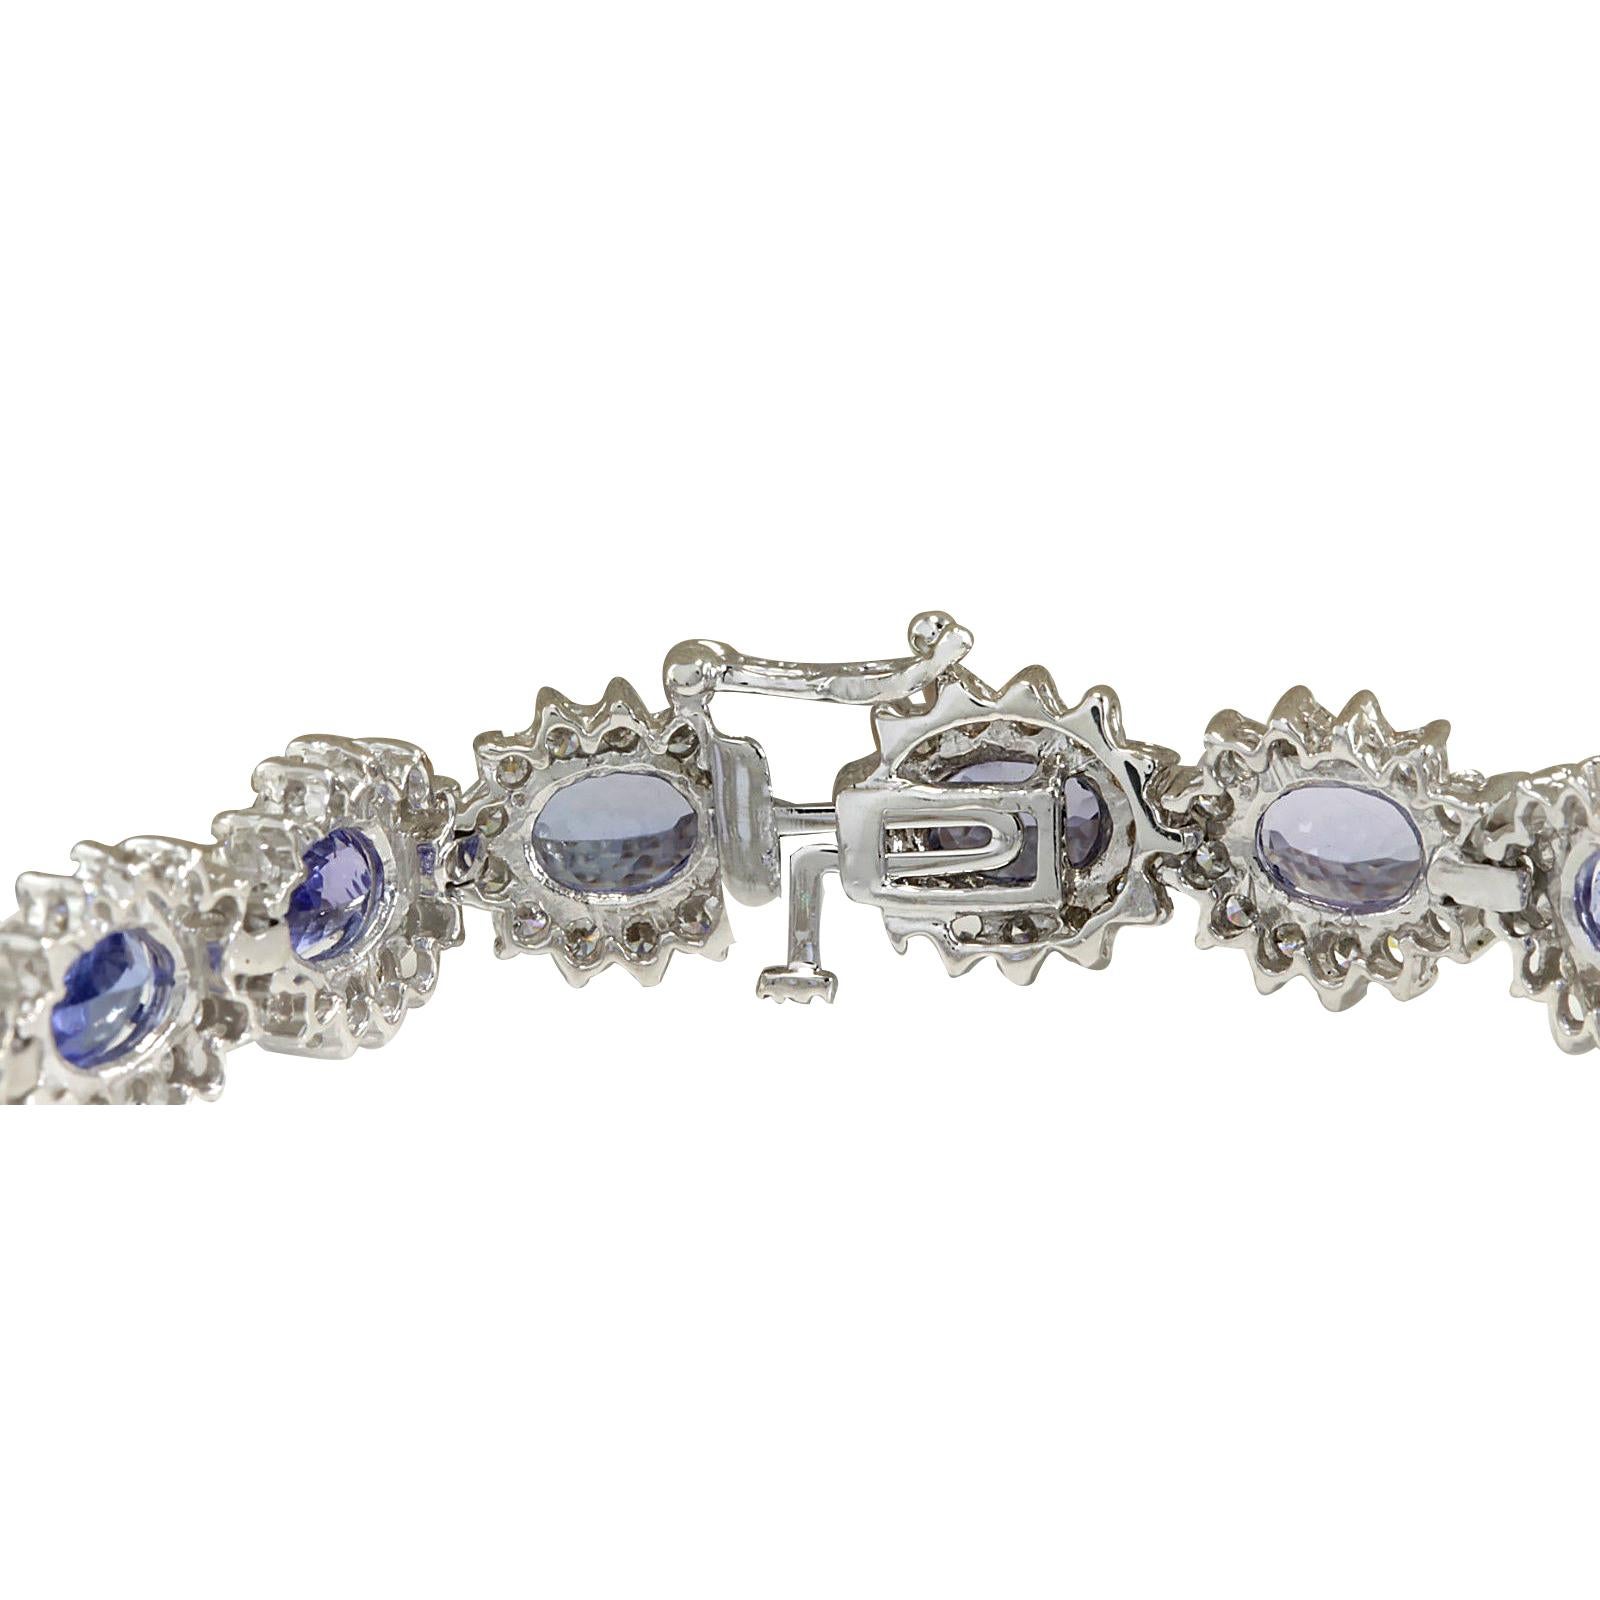 Stamped: 18K White Gold
Total Bracelet Weight: 20.3 Grams
Bracelet Length: 7.5 Inches
Bracelet Width: 10.40 mm
Gemstone Weight: Total Natural Tanzanite Weight is 13.30 Carat (Measures: 5.10x7.15 mm)
Color: Blue
Diamond Weight: Total Natural Diamond